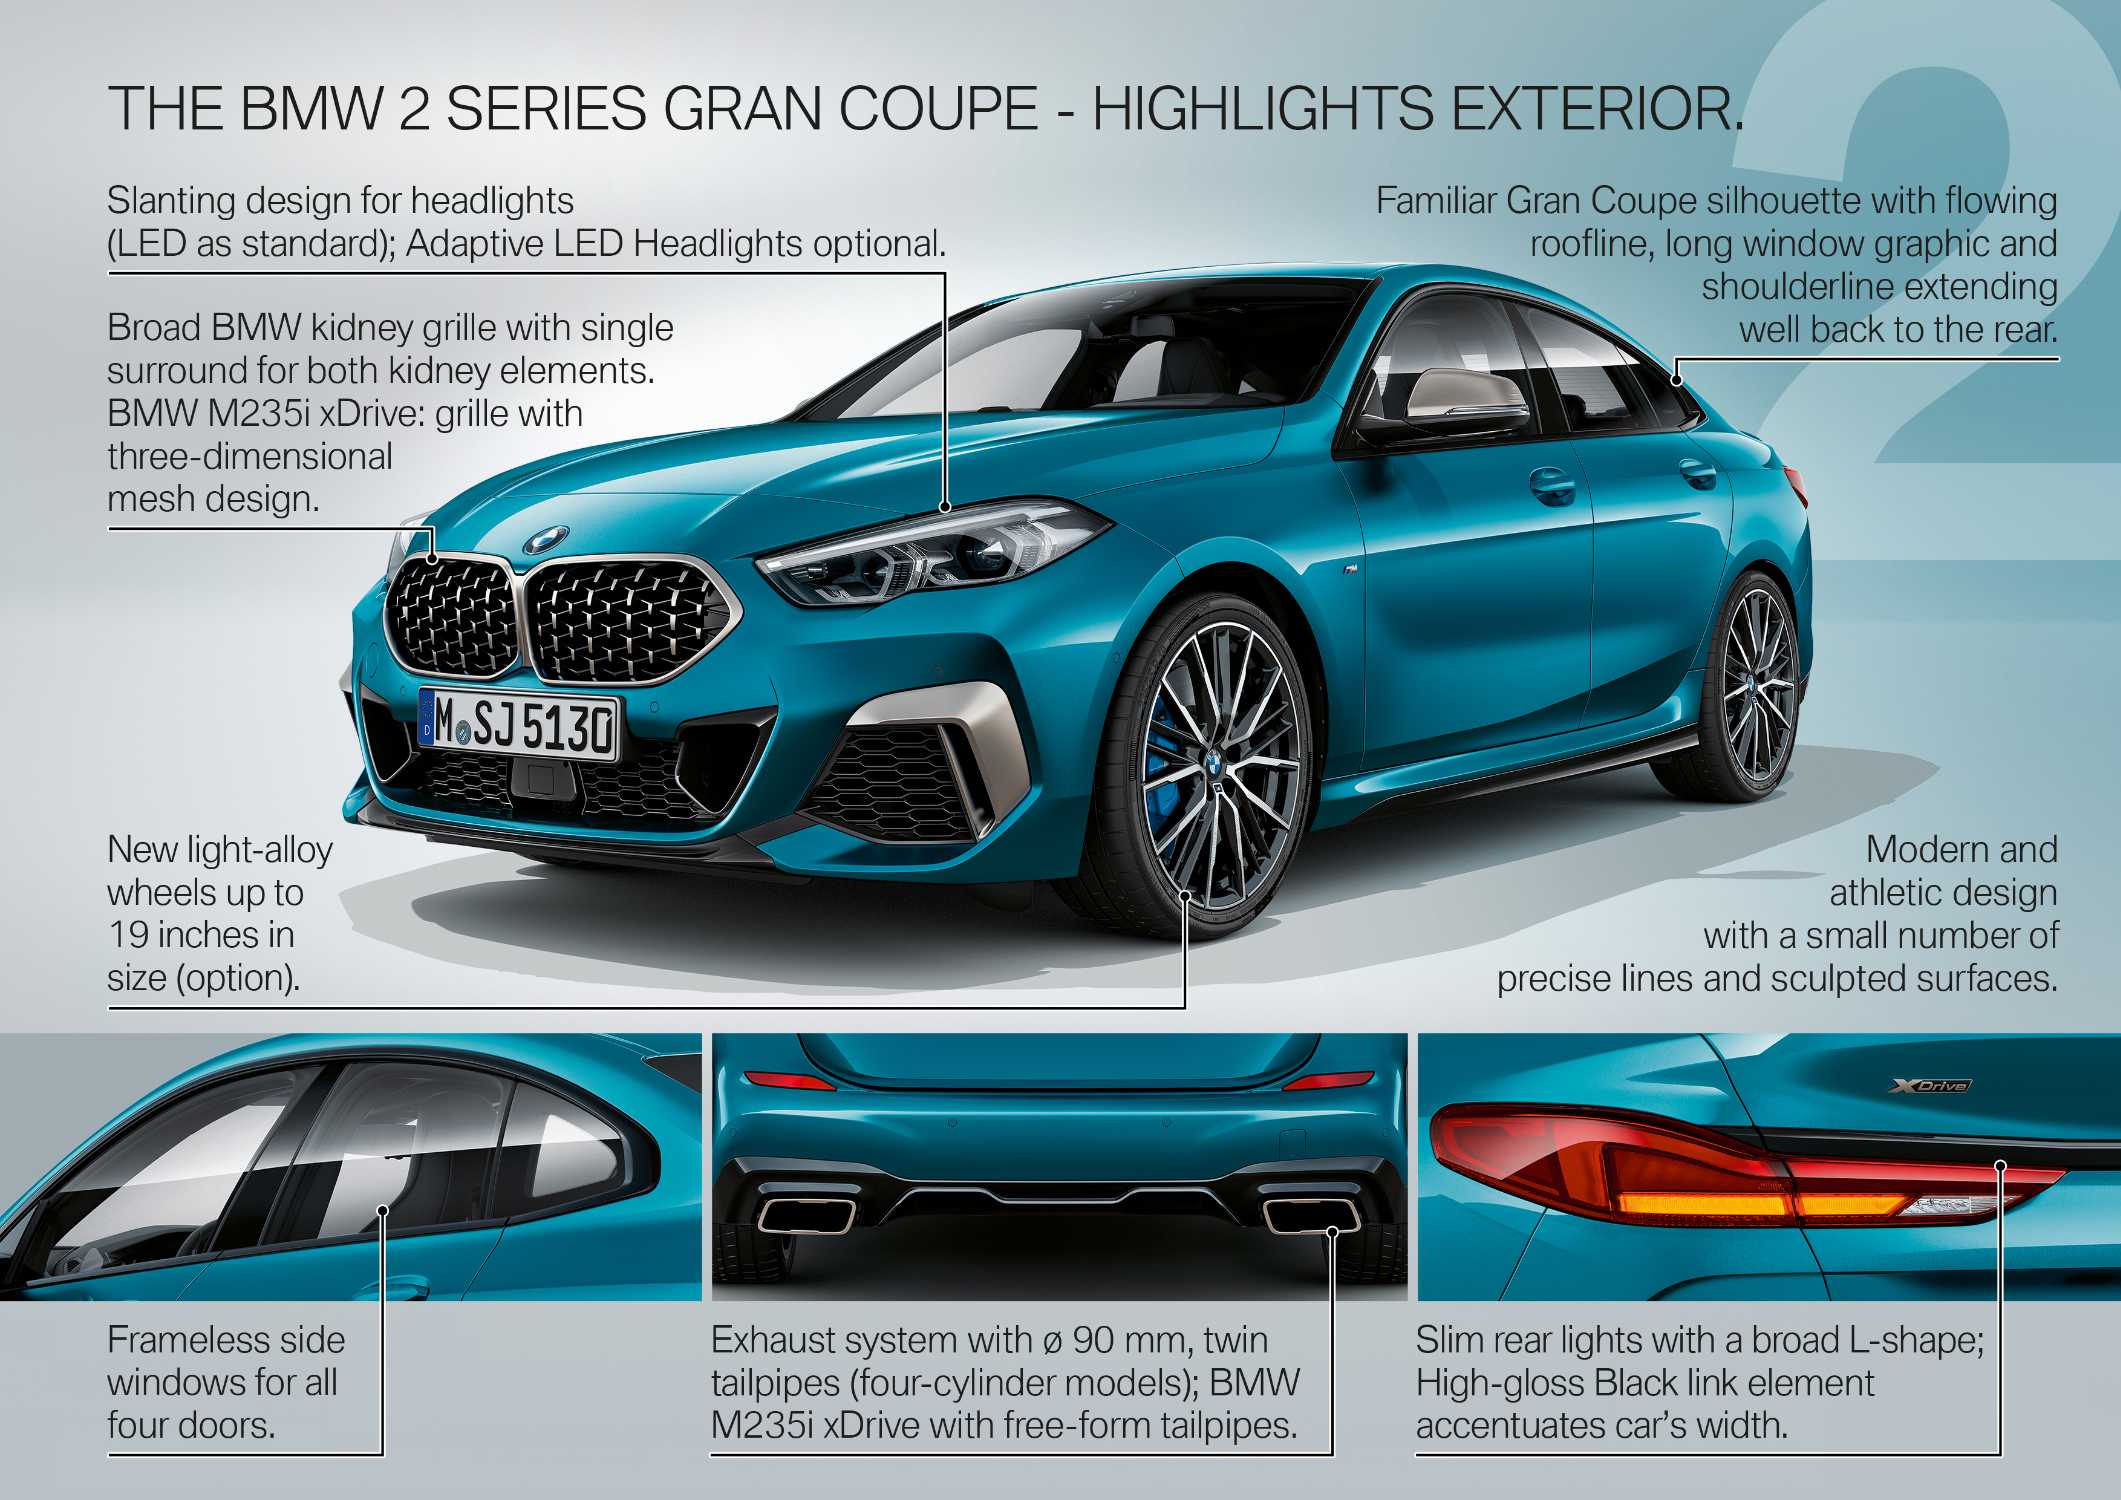 The all-new BMW 2 Series Gran Coupe -  Product Highlights (10/2019).